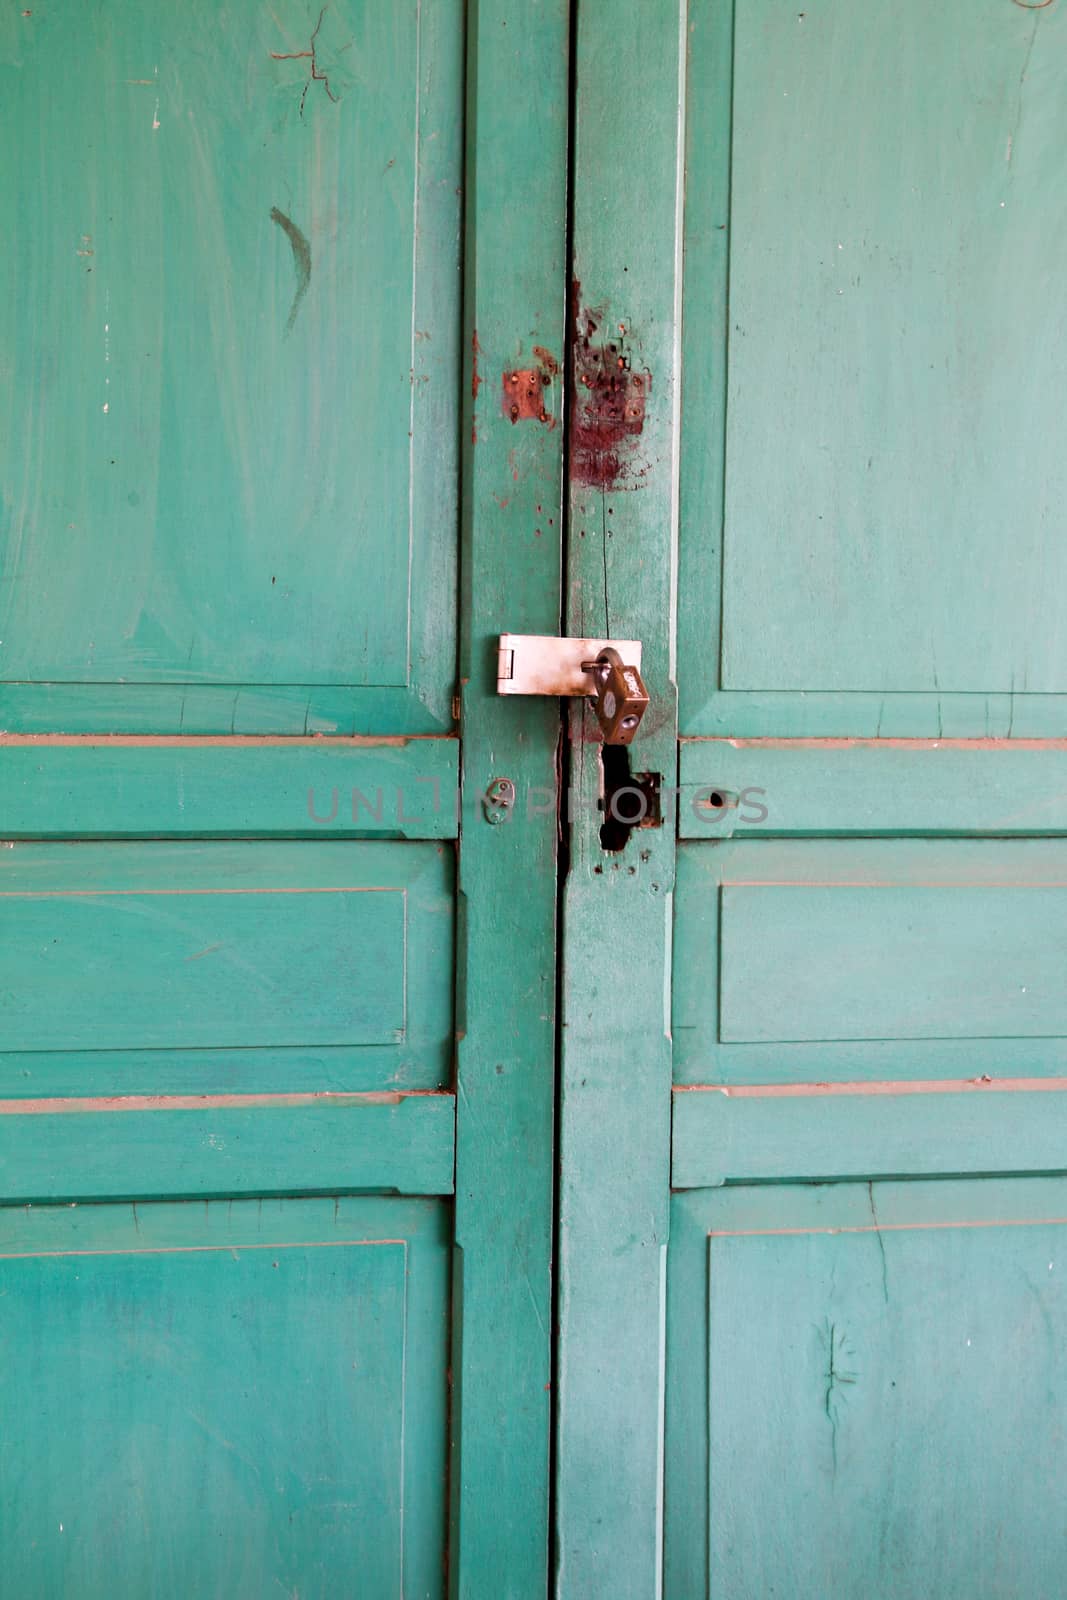 wooden Green retro door. Old architectural element. Vibrant colors.